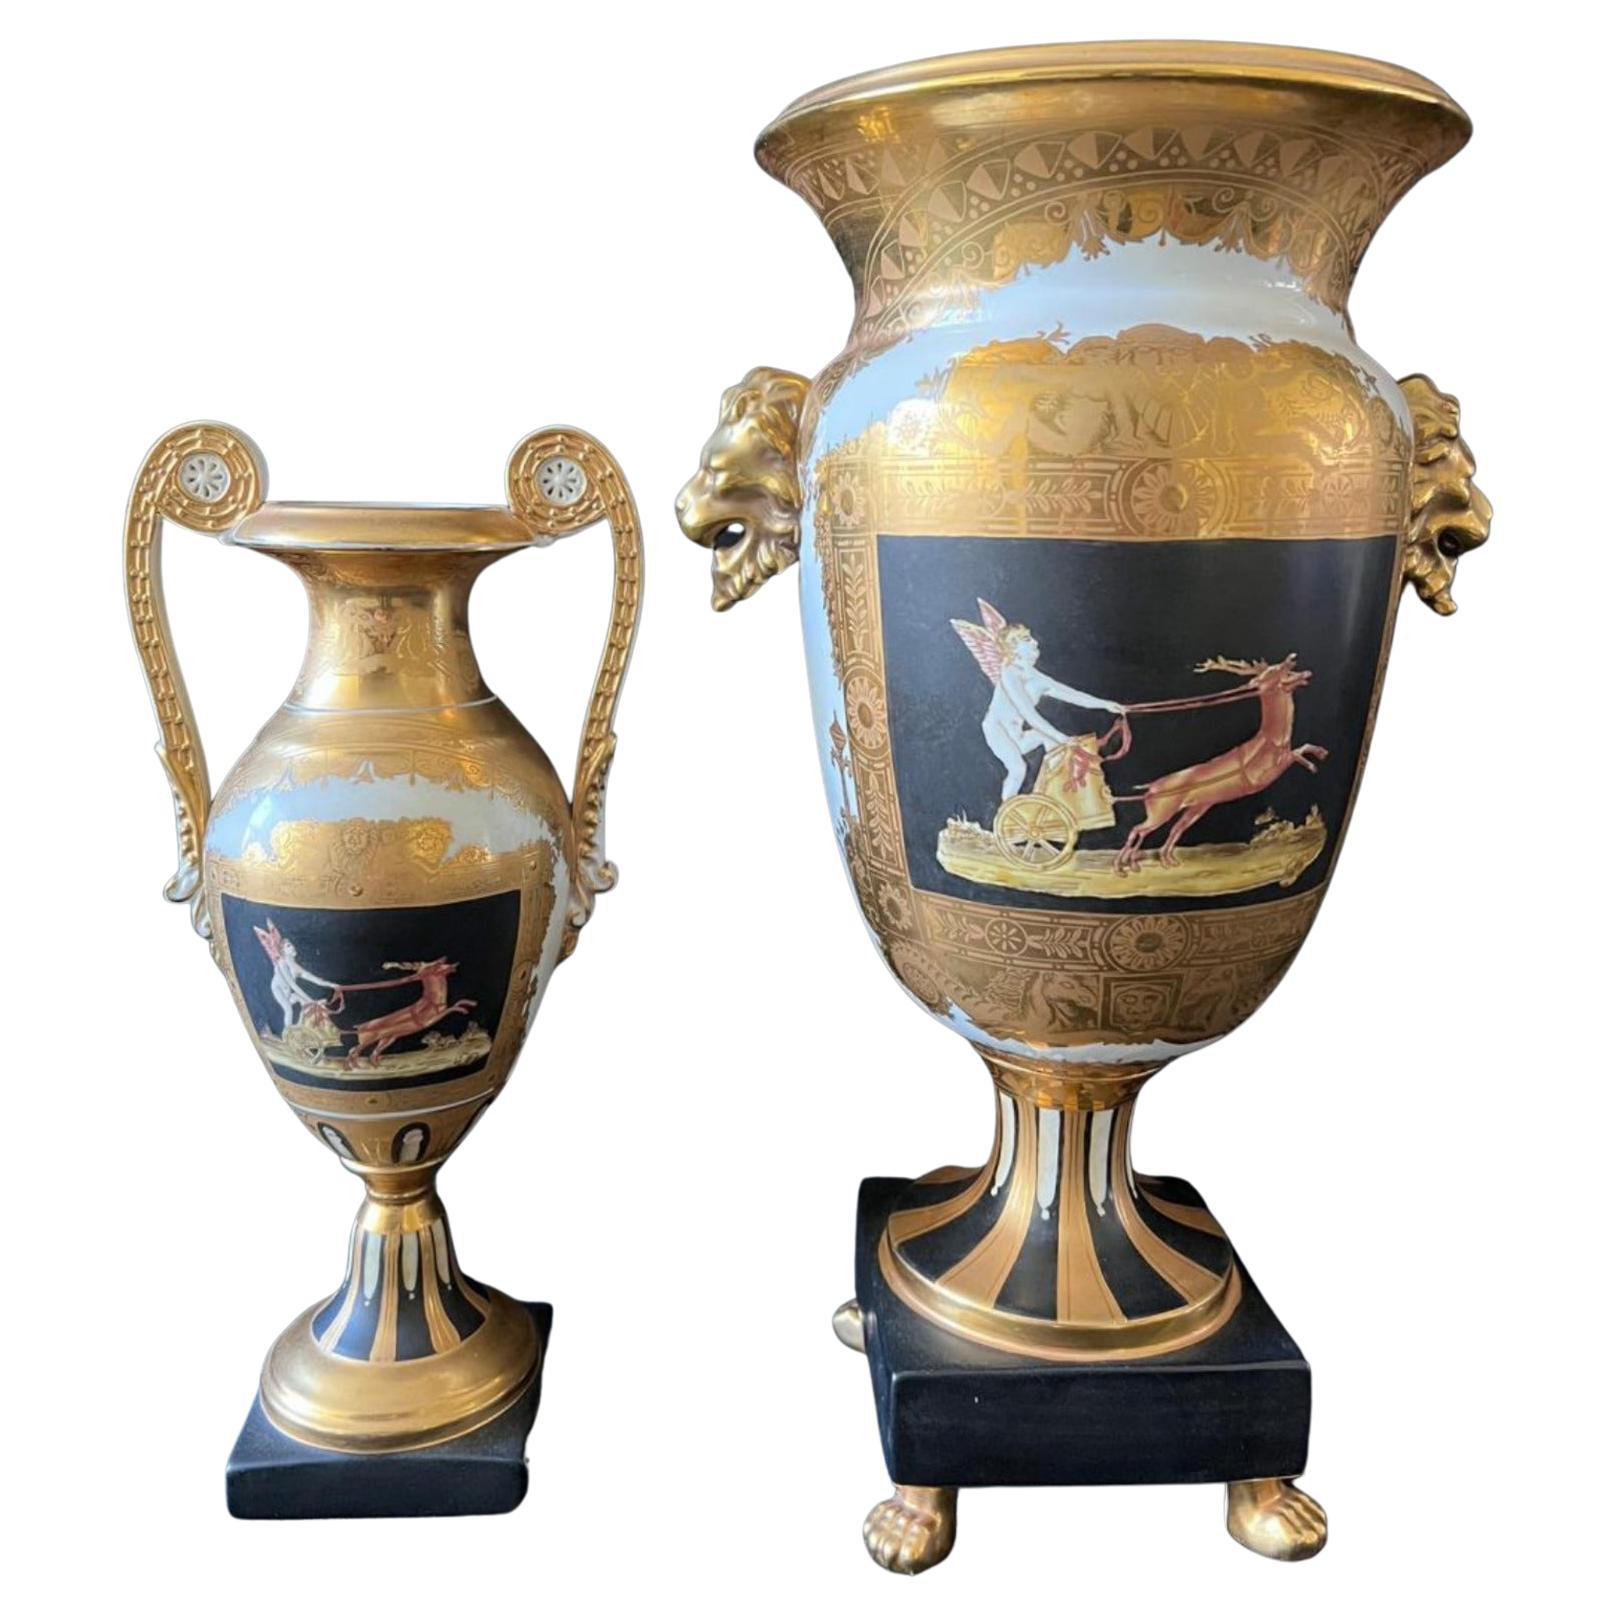 Pair of Two Magnificent Vases in the Shape of Greek Amphorae French Empire, 19th